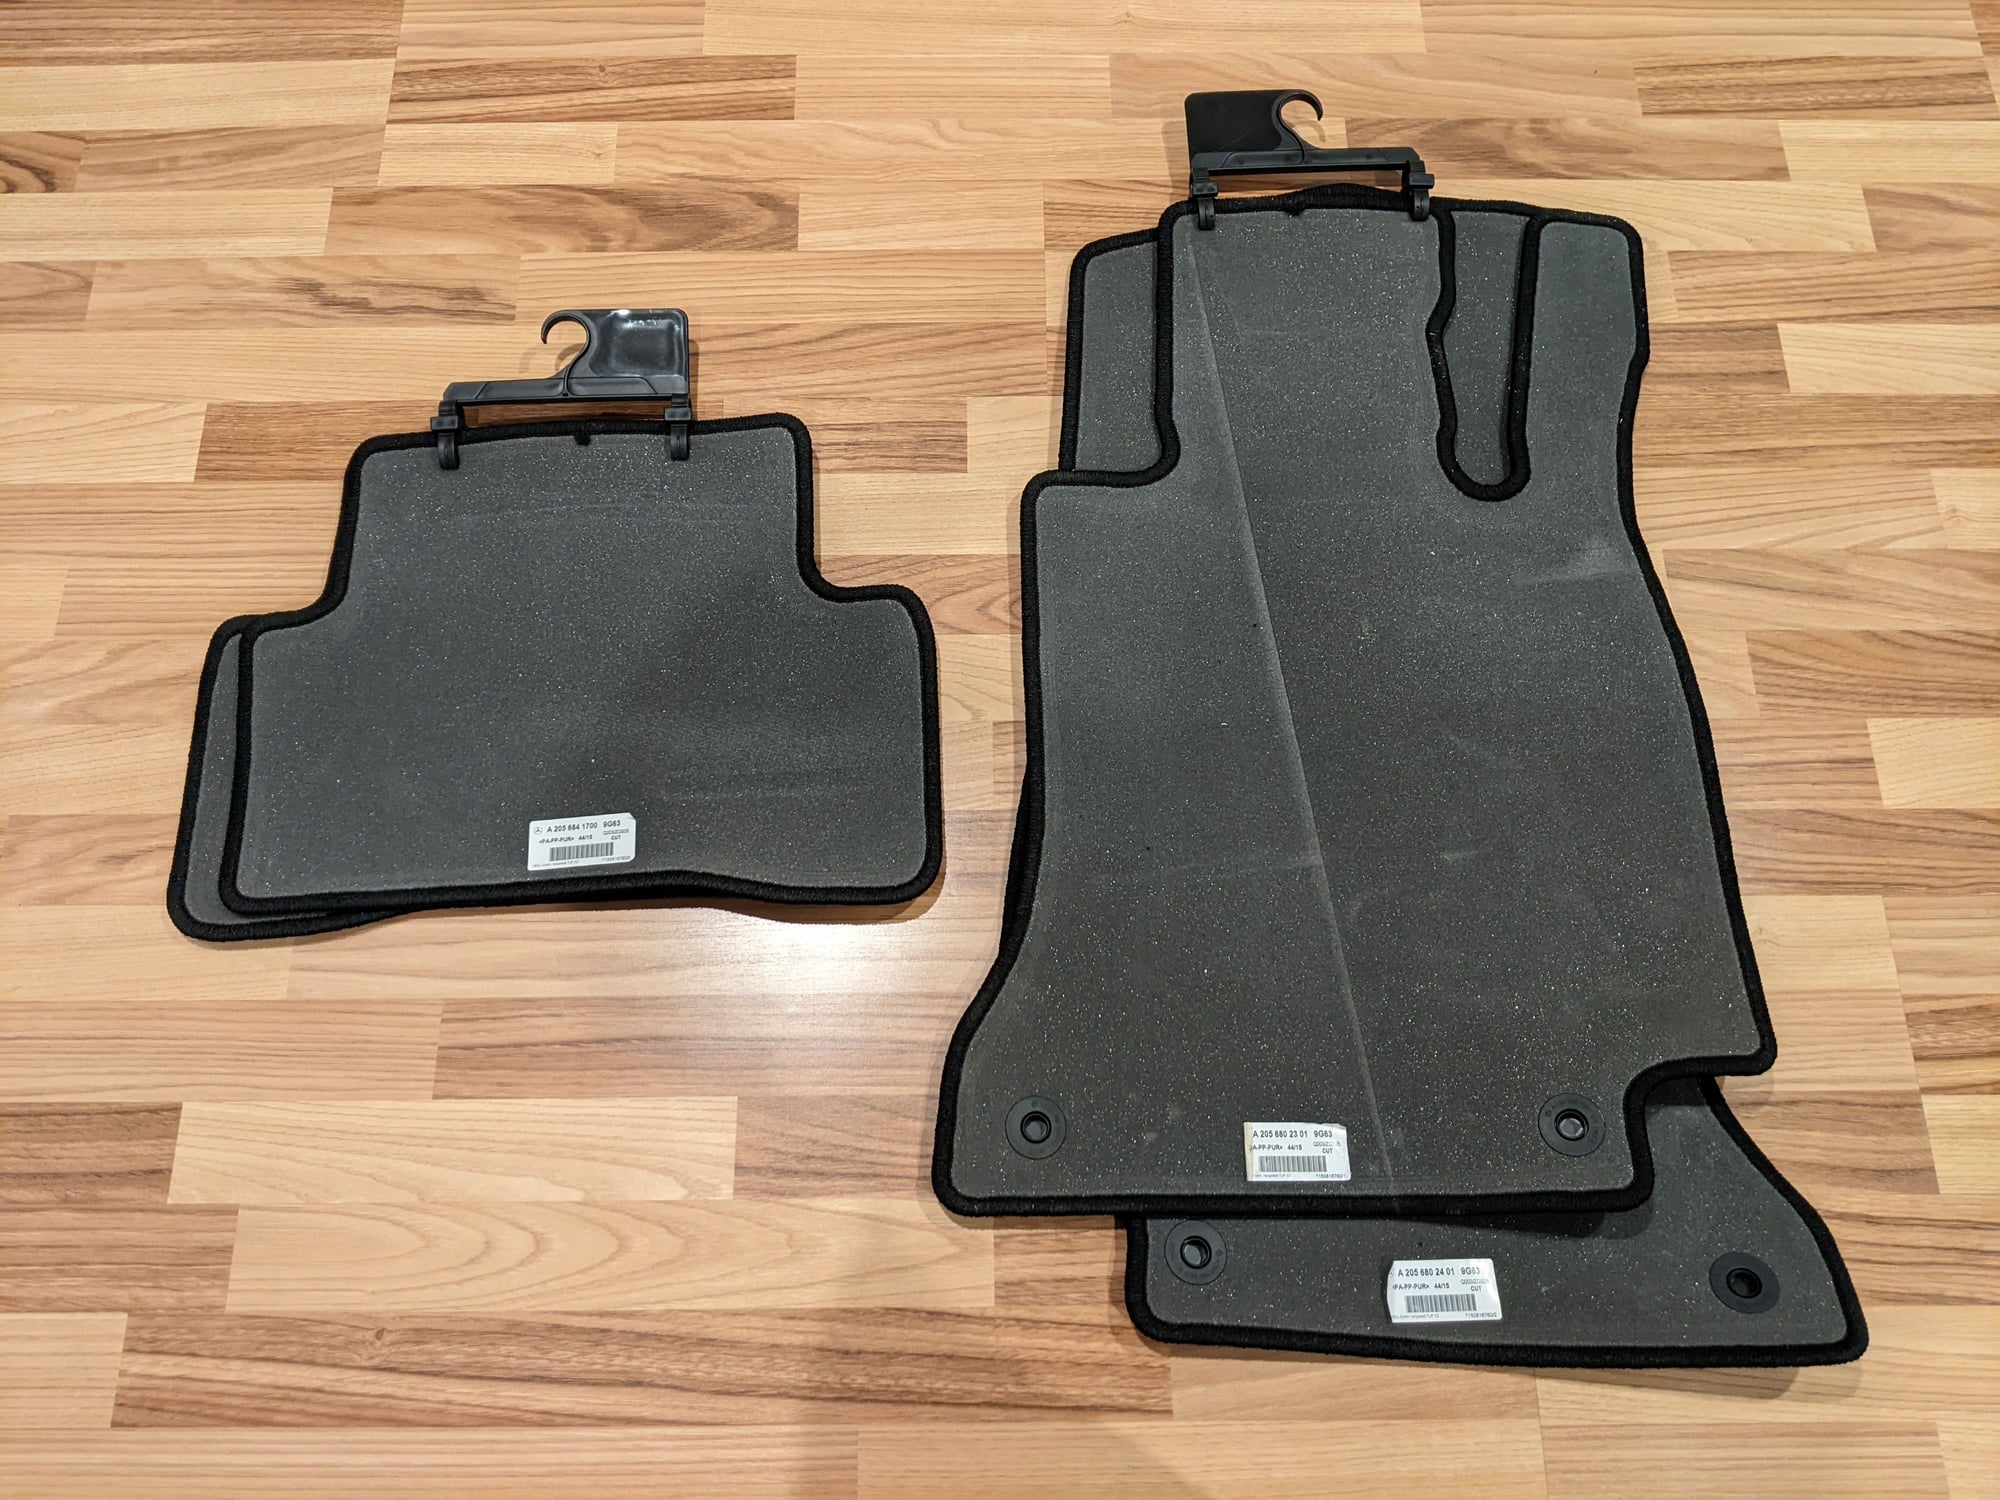 Interior/Upholstery - Brand New Genuine MB-AMG Floor Mats - New - 2015 to 2021 Mercedes-Benz C-Class - Clifton, VA 20124, United States